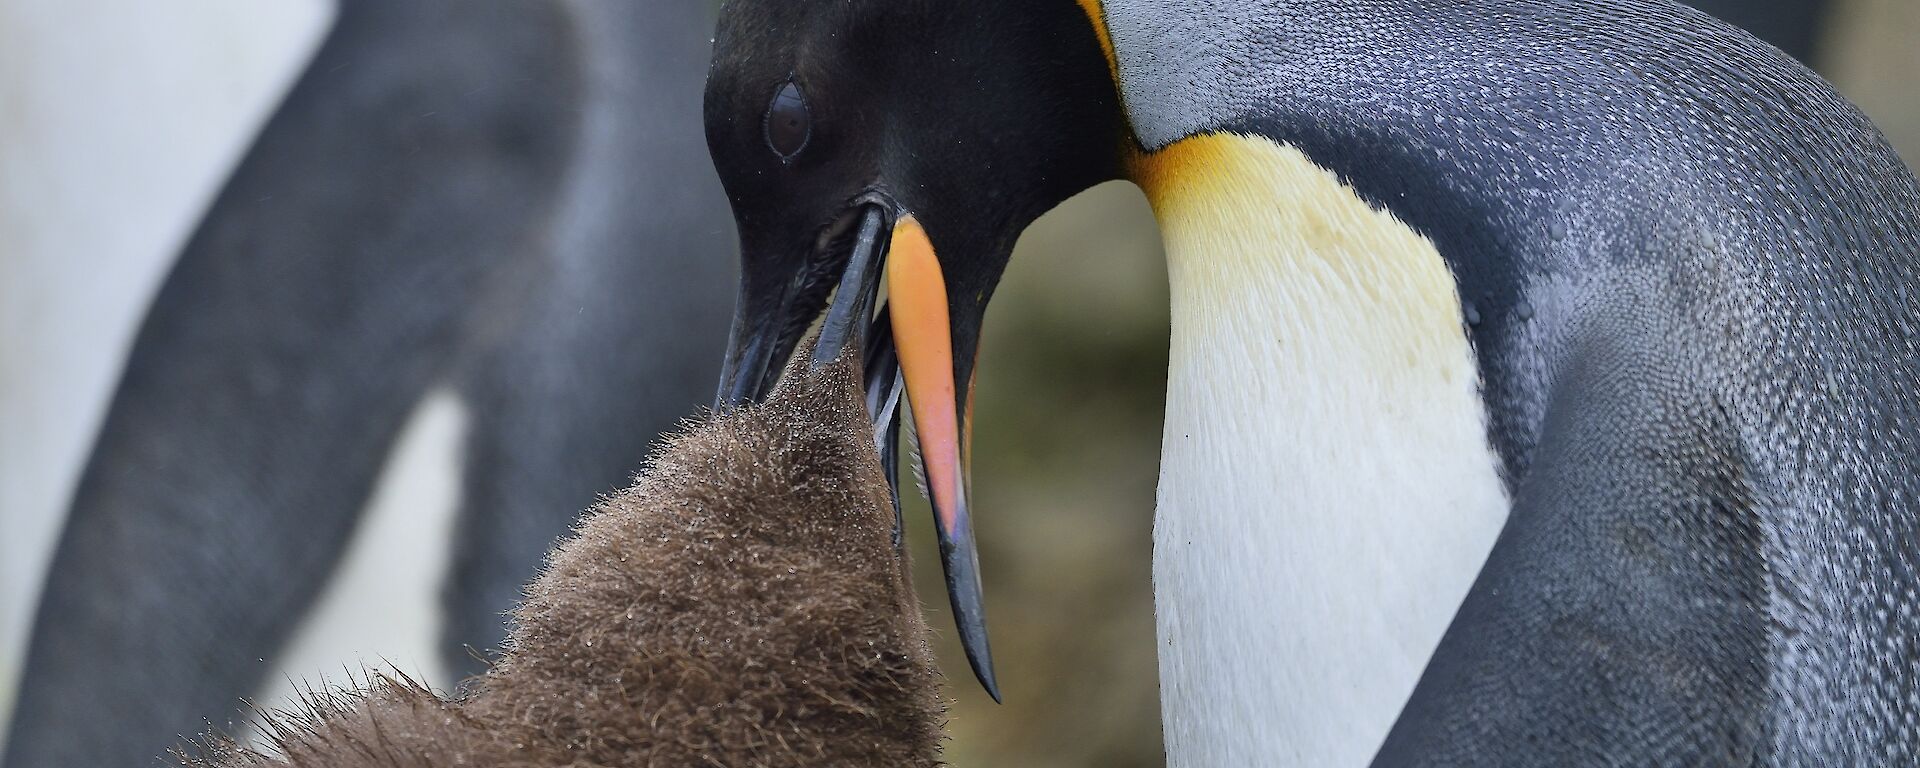 A brown fluffy King Penguin chick is feeding from the beak of an adult King penguin